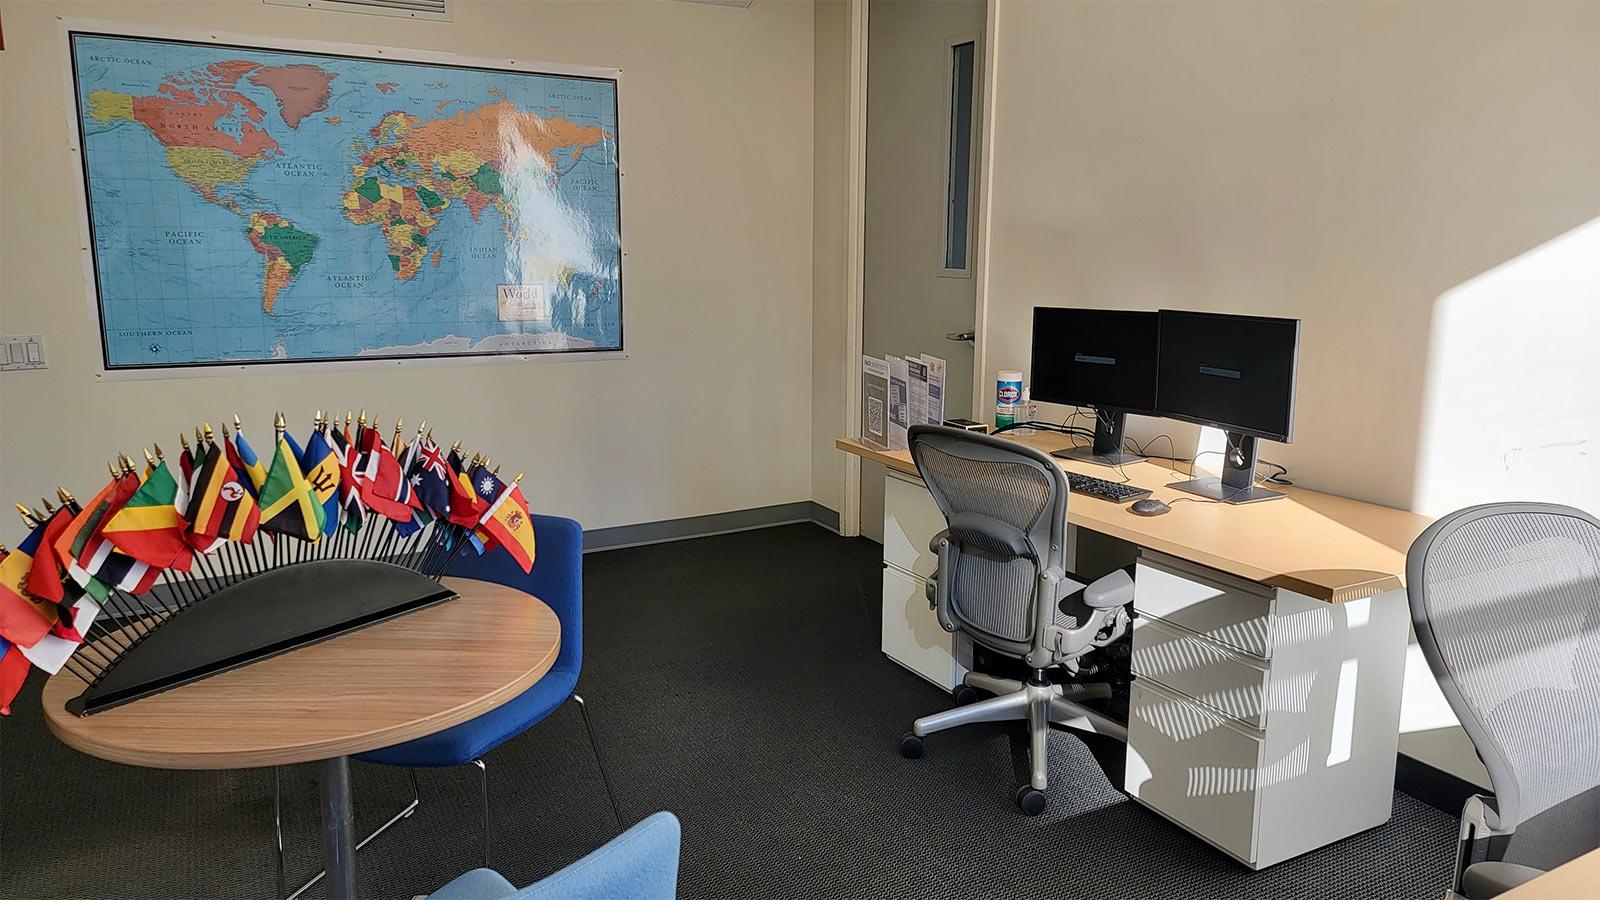 room with a world map on the wall, a desk with a computer, and a table with miniature world flags.